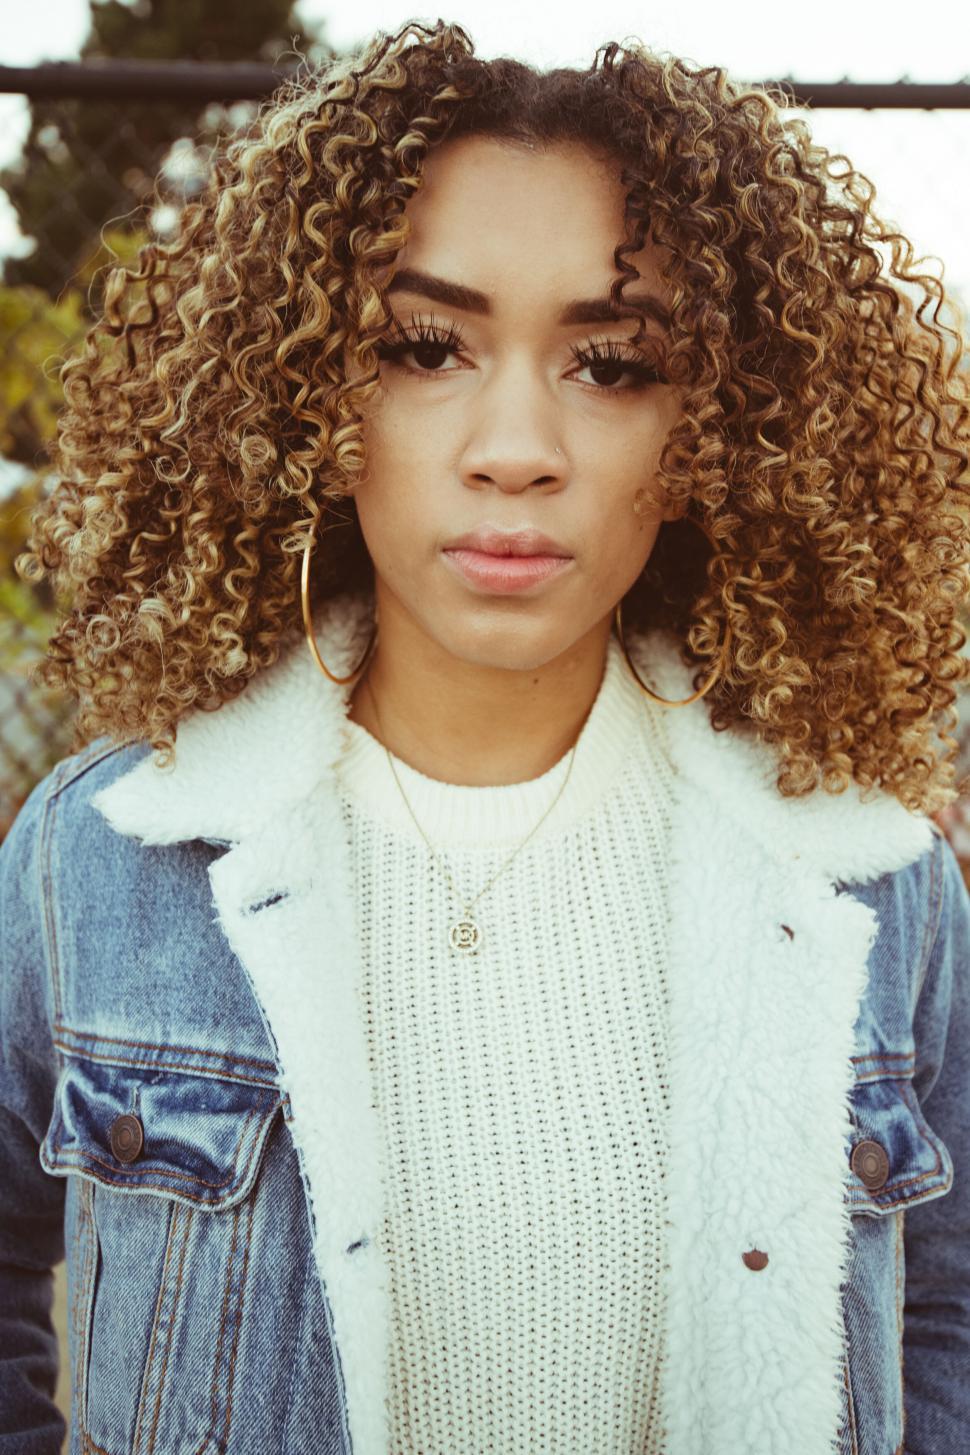 Free Image of Curly Haired Woman in Denim Jacket 